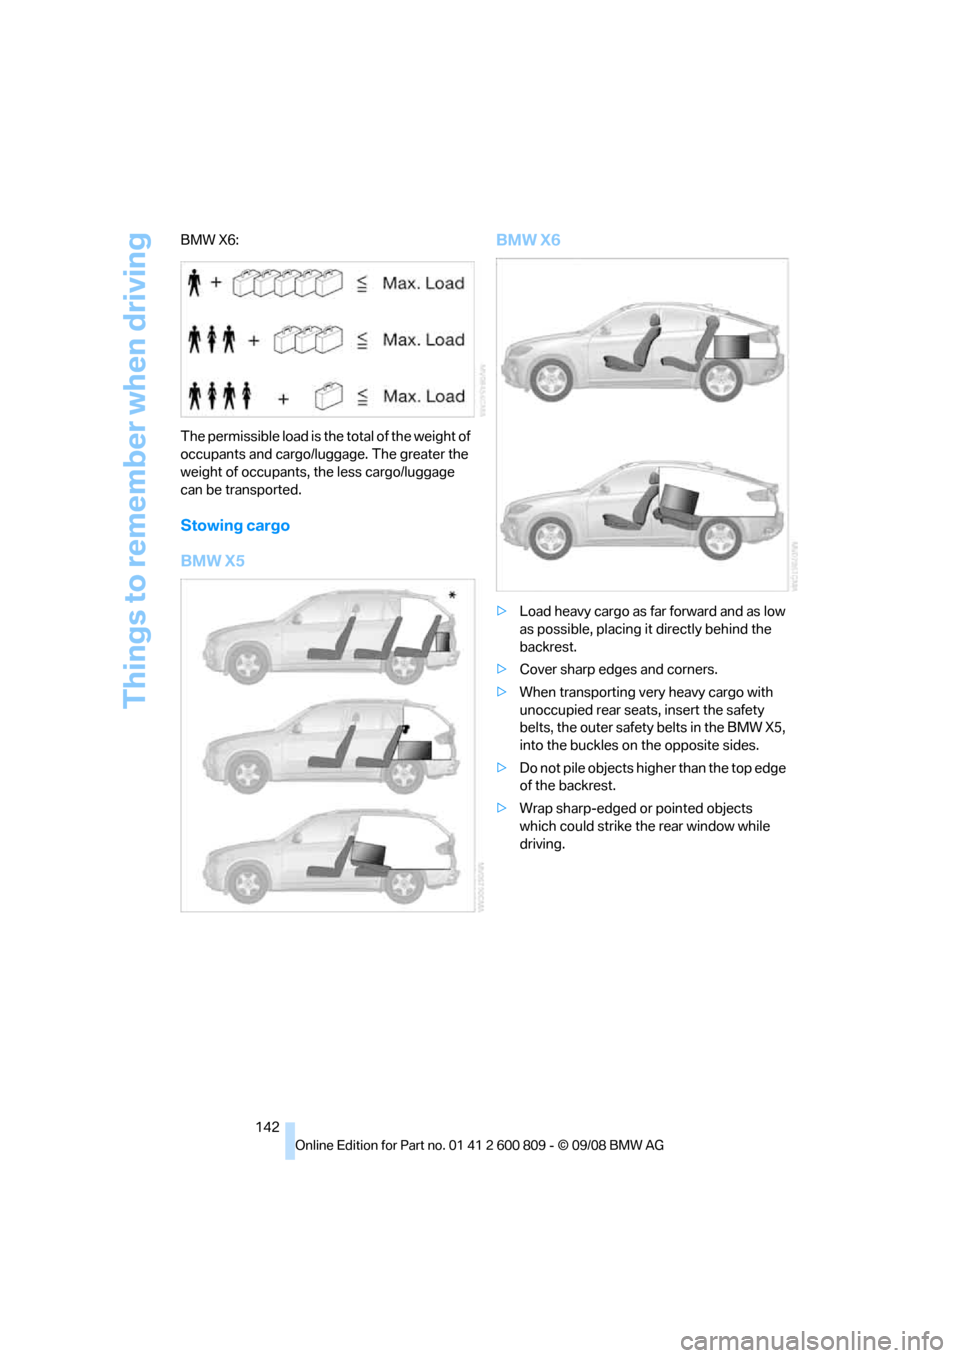 BMW X6 XDRIVE 2009 E71 Owners Manual Things to remember when driving
142
BMW X6:
The permissible load is the total of the weight of 
occupants and cargo/luggage. The greater the 
weight of occupants, the less cargo/luggage 
can be transp